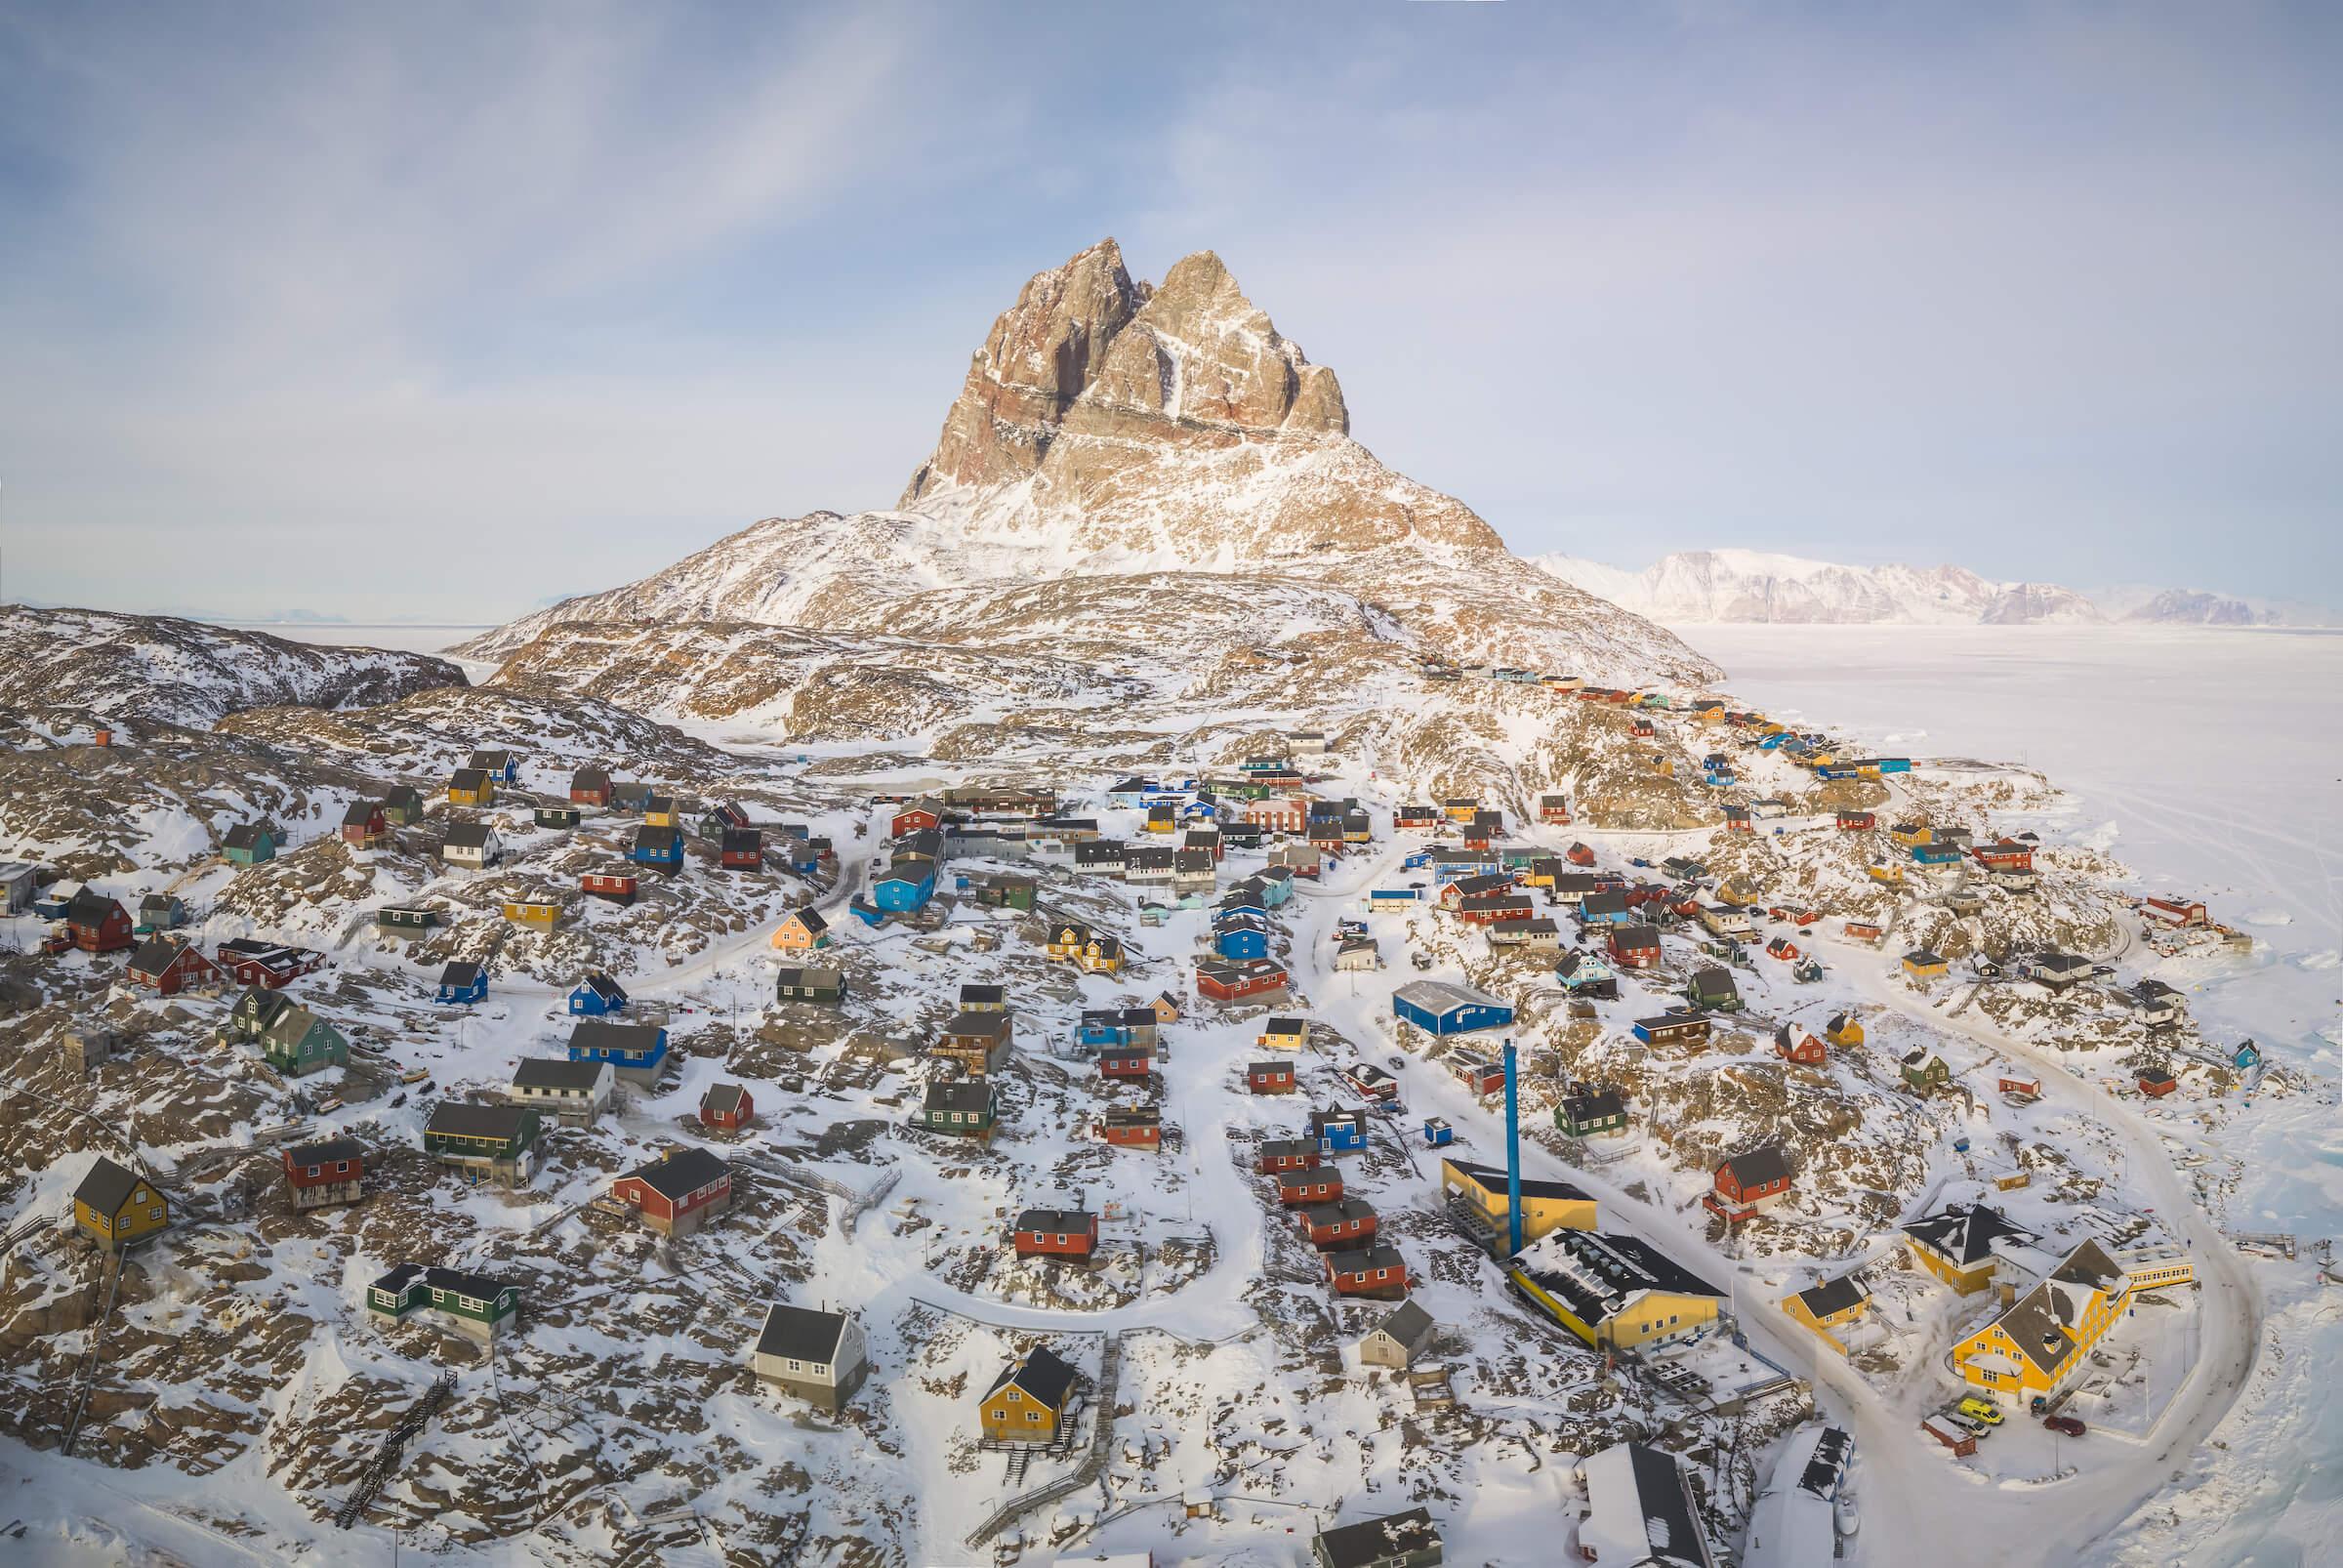 Uummannaq Town photographed from above. Photo - Erez Marom, Visit Greenland